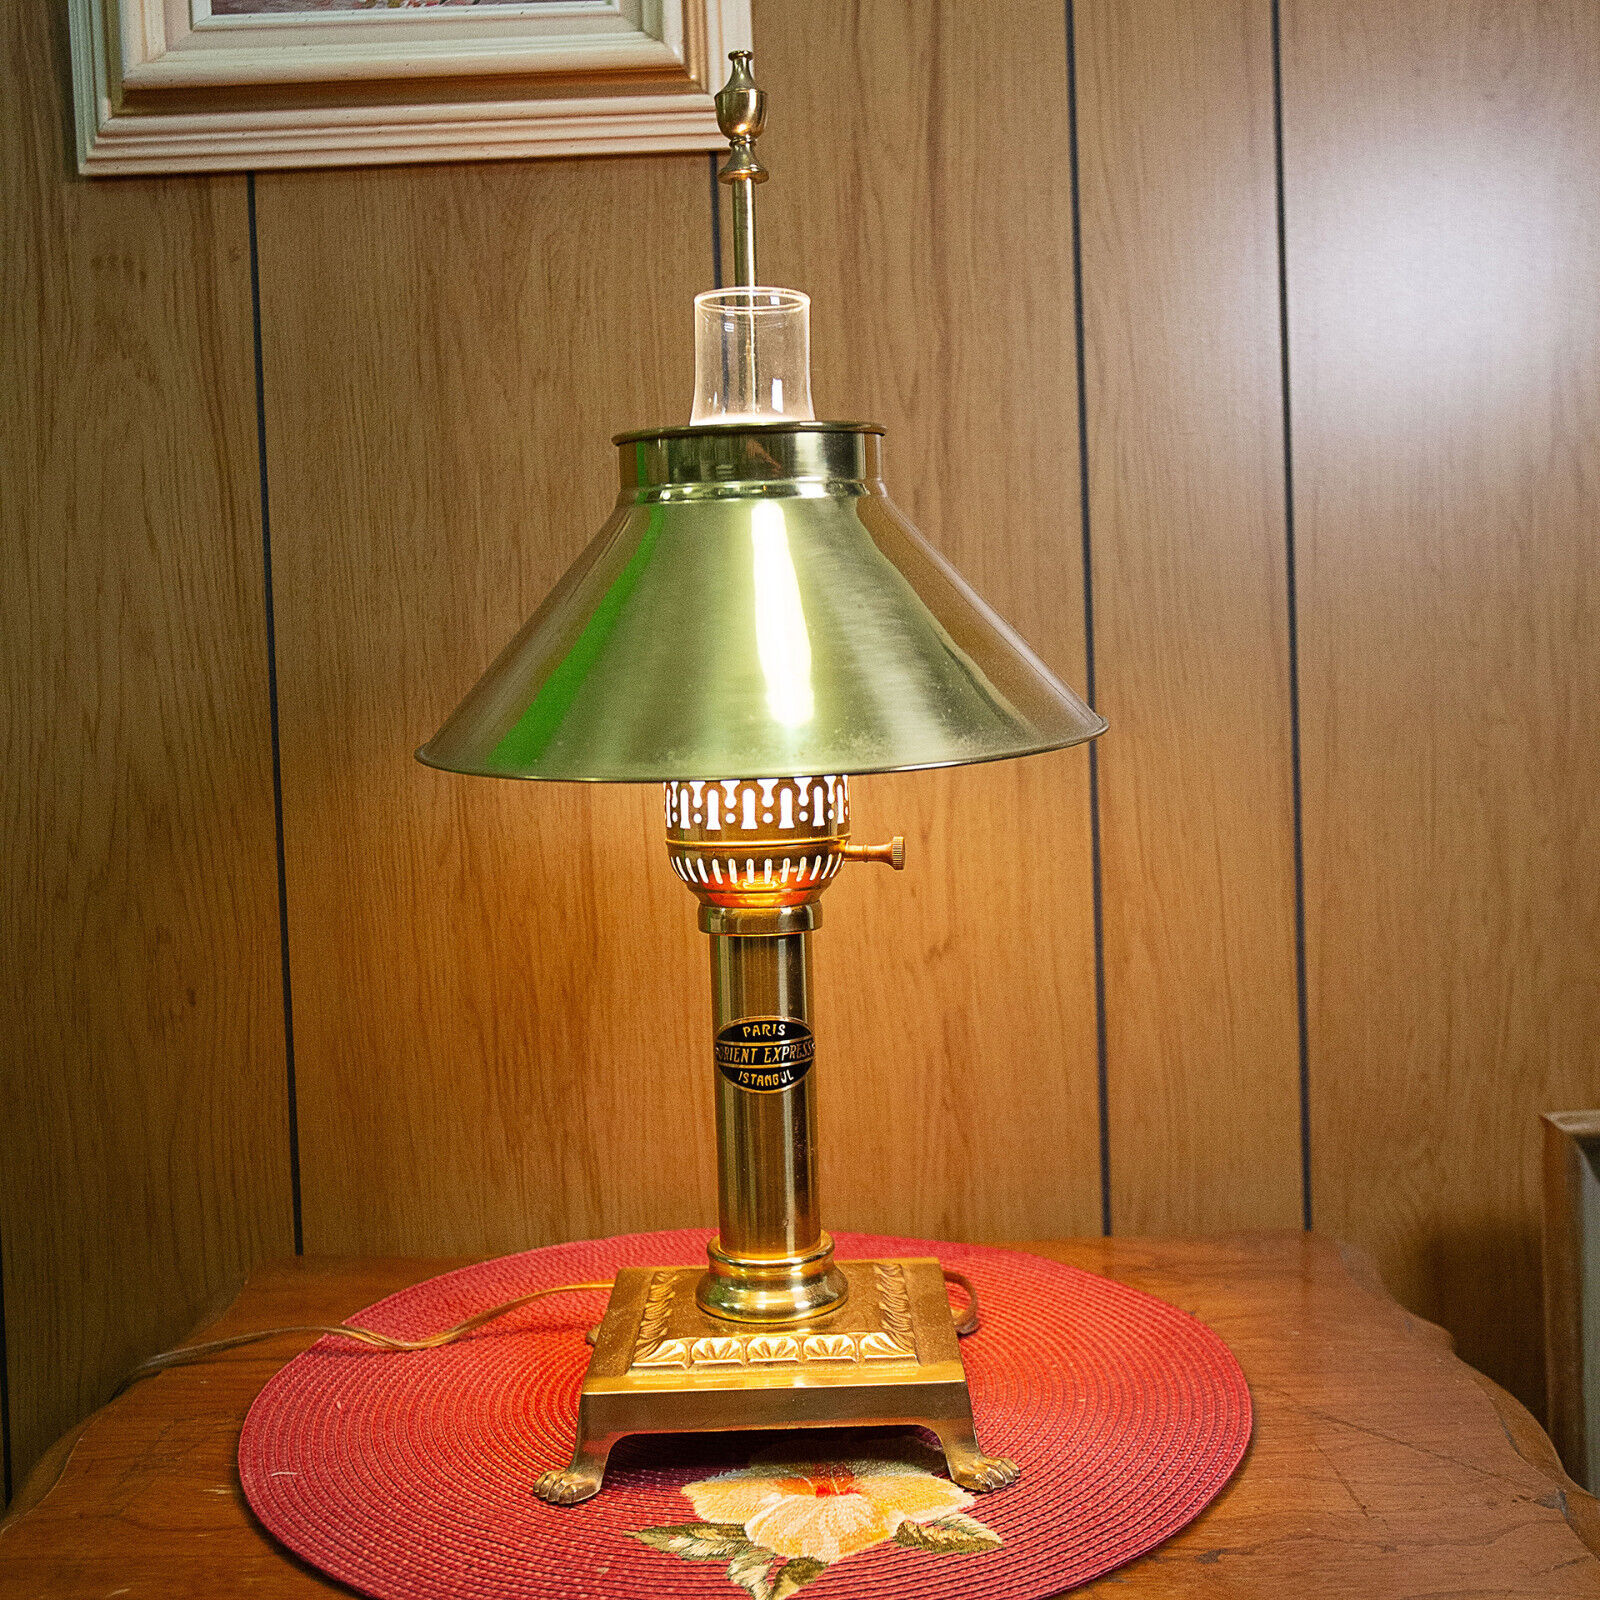 VTG Brass Orient Express Desk Lamp Railroad Lamp Claw Foot Adjustable Shade